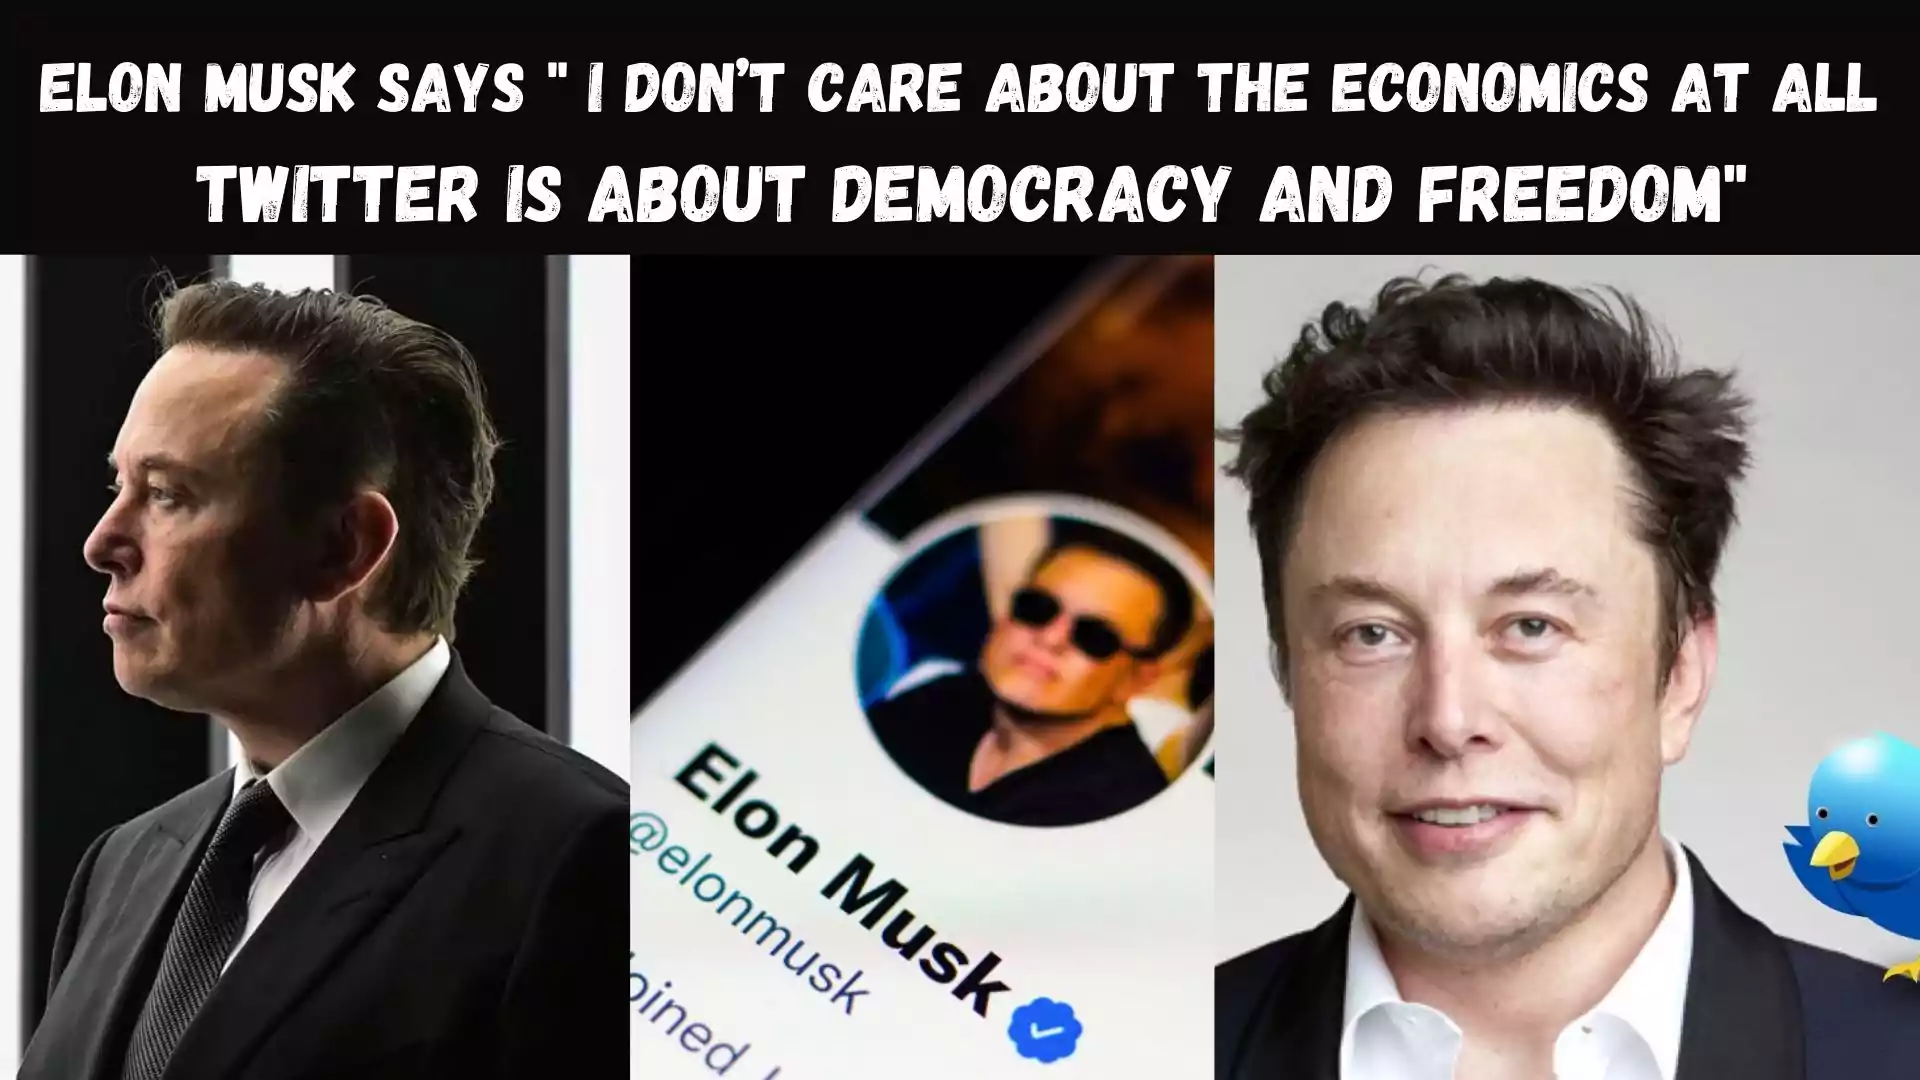 Elon Musk says " I don’t care about the economics at all Twitter is about democracy and freedom" wallpaper and images